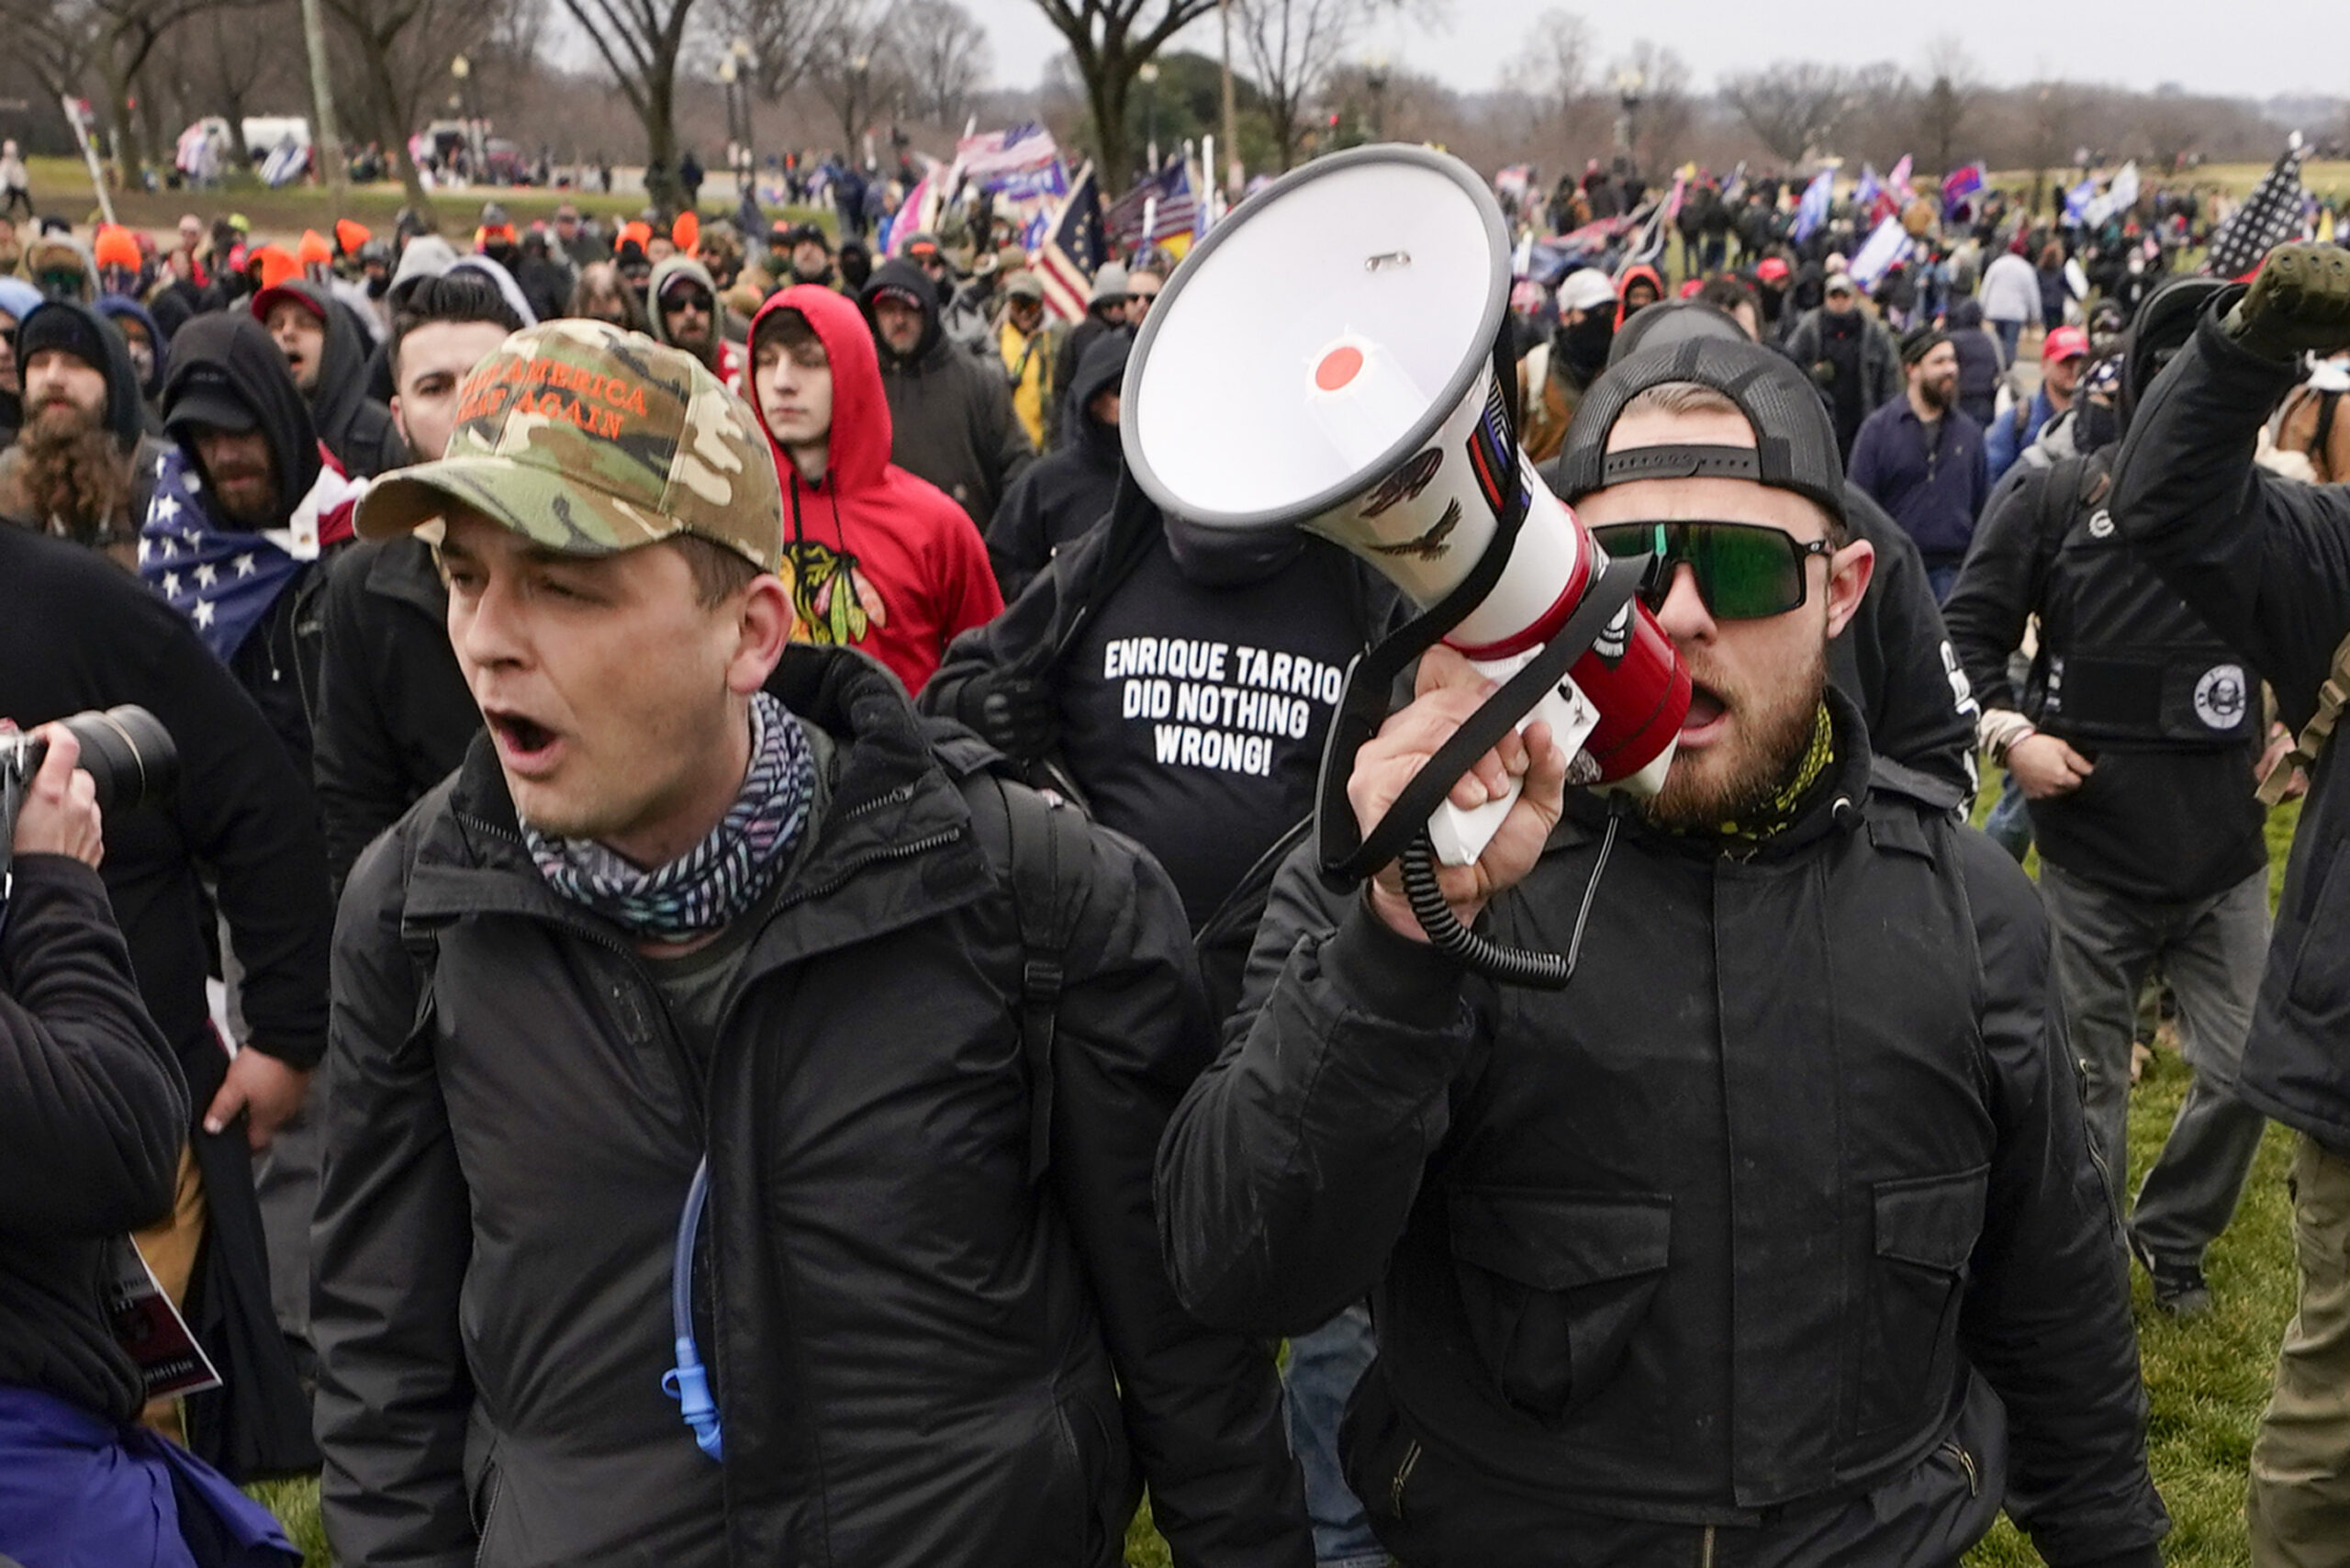 FILE - Proud Boys members Zachary Rehl, left, and Ethan Nordean, left, walk toward the U.S. Capitol in Washington, in support of President Donald Trump, Jan. 6, 2021. An upcoming hearing of the U.S. House Committee probing the Jan. 6 insurrection is expected to examine ties between people in former President Donald Trump's orbit and extremist groups who played a role in the Capitol riot. (AP Photo/Carolyn Kaster, File)